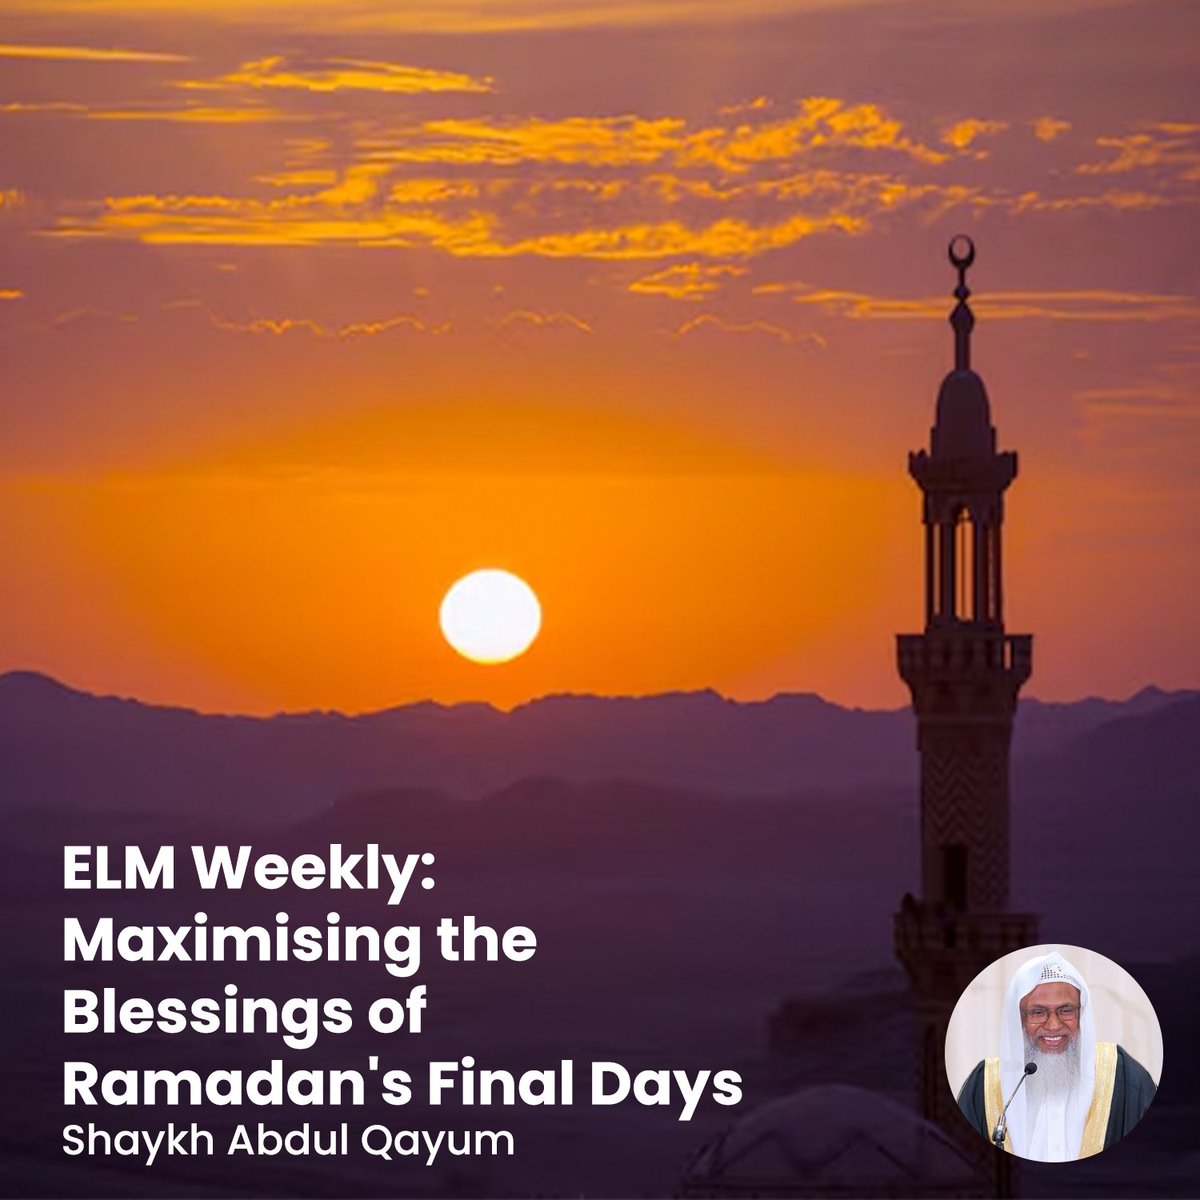 🌙✨ Embrace the final days of Ramadan with devotion. Seek Laylatul Qadr, forgiveness, and growth before we bid farewell to this blessed month 📿💖 🔗 Read the blog: eastlondonmosque.org.uk/blog/maximisin… #EastLondonMosque #RamadanReflections #LastTenNights #SpiritualJourney #LaylatulQadr